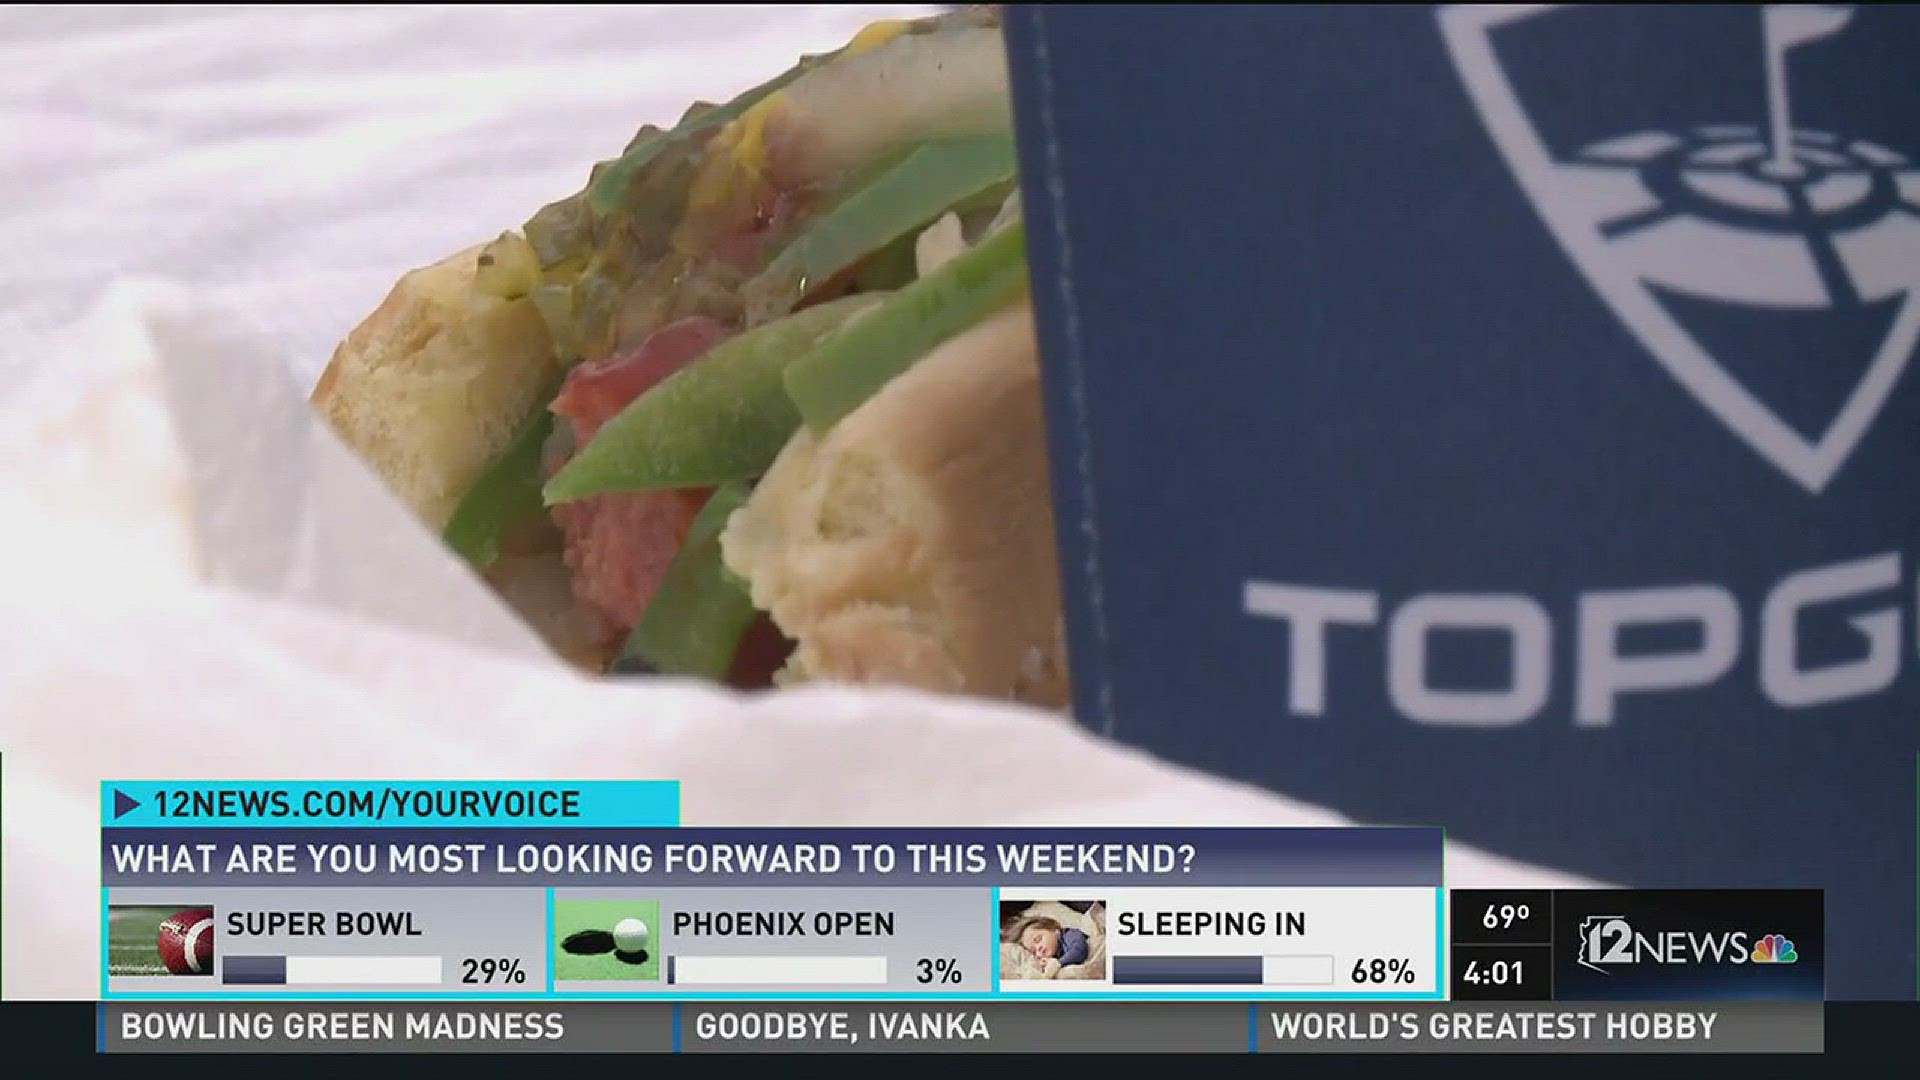 Food is no game at Phoenix Open 12news